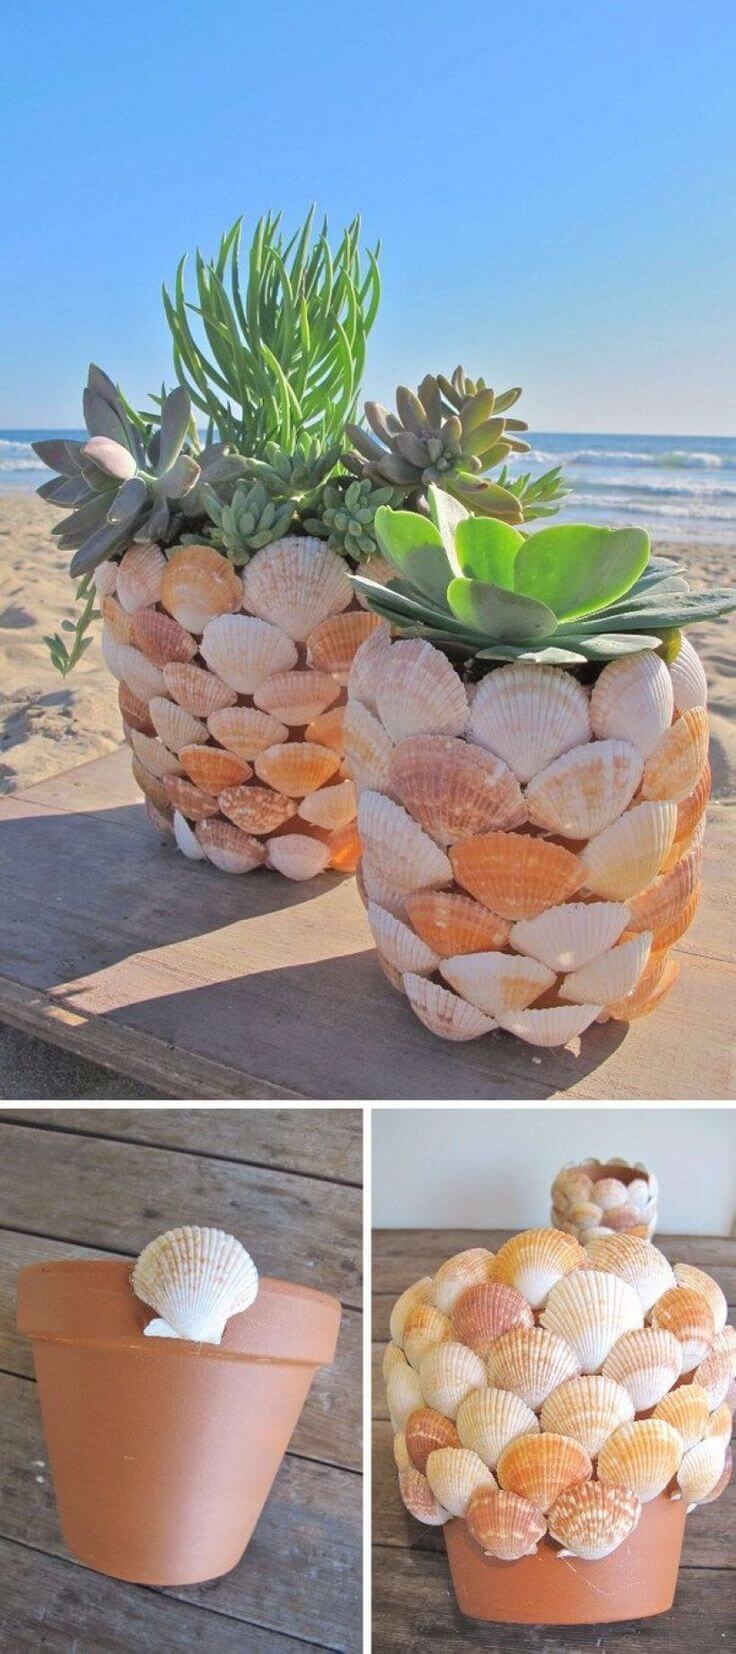 Shell Covered Seaside Plant Displays